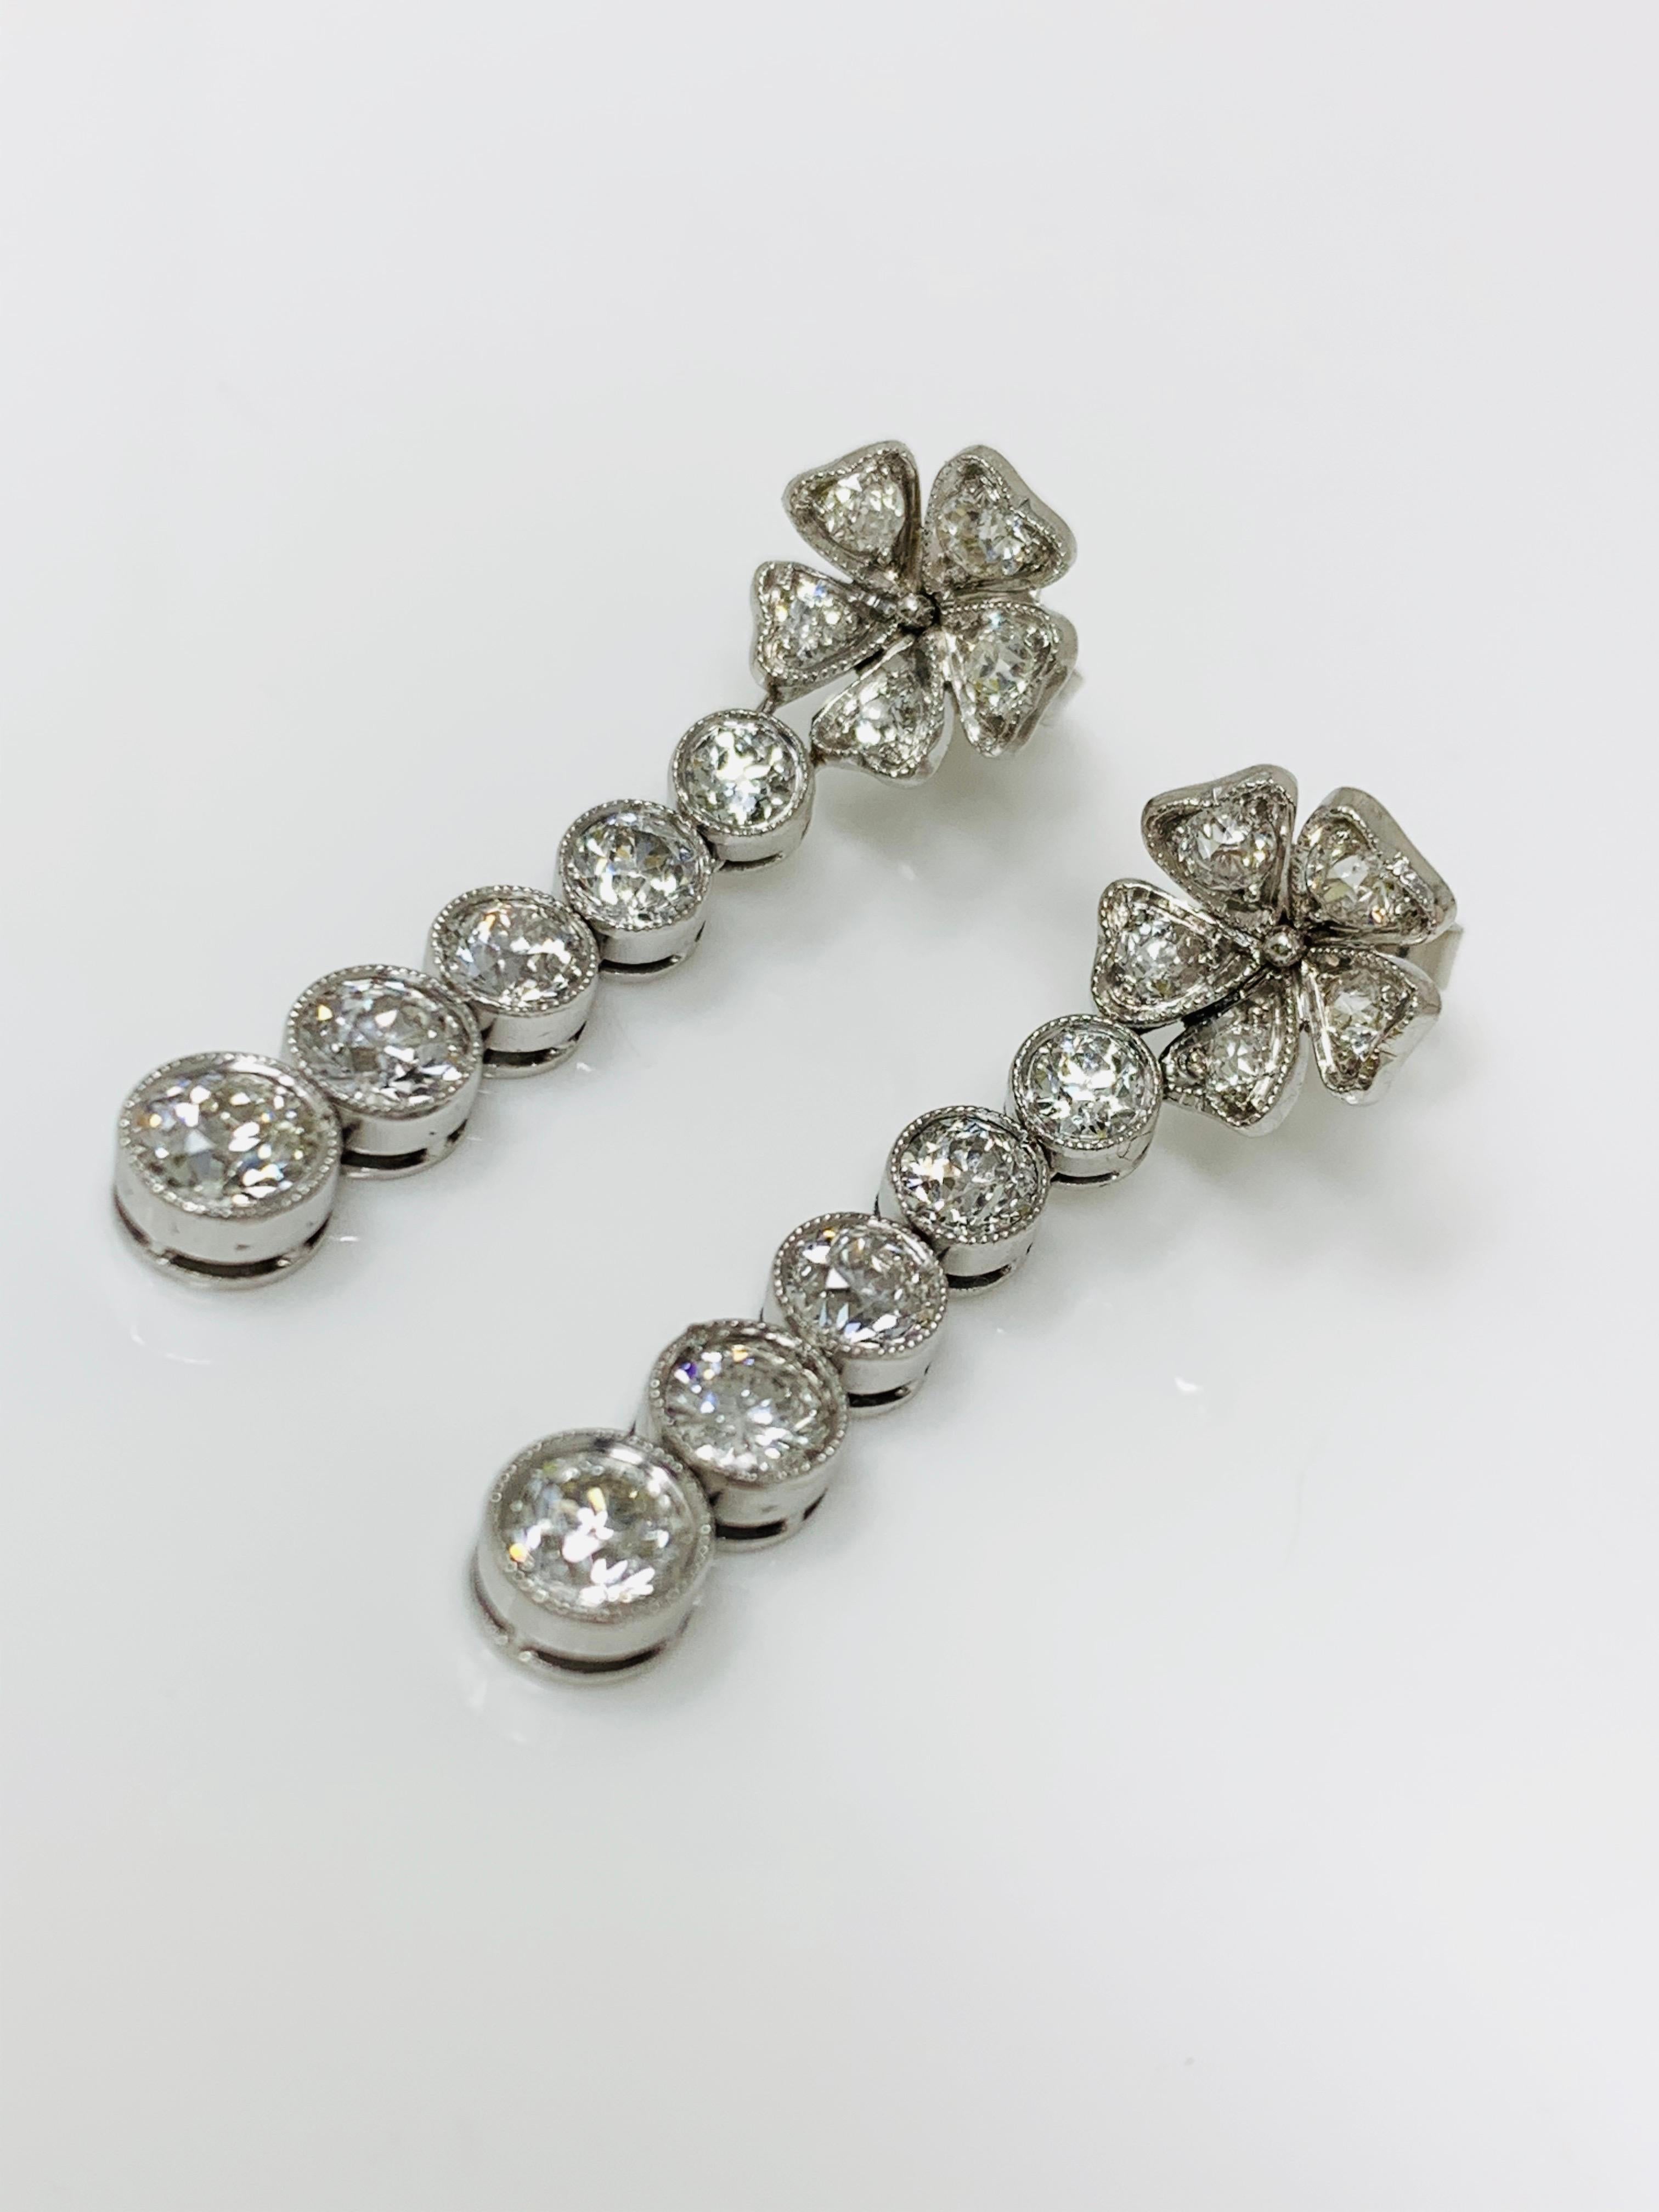 Moguldiam Inc's 1930 antique old european cut diamond earrings are gorgeous and beautifully hand made. 
Diamond weight : 2.50 carat 
Metal : Platinum 
Measurements: 1 1/4 inch